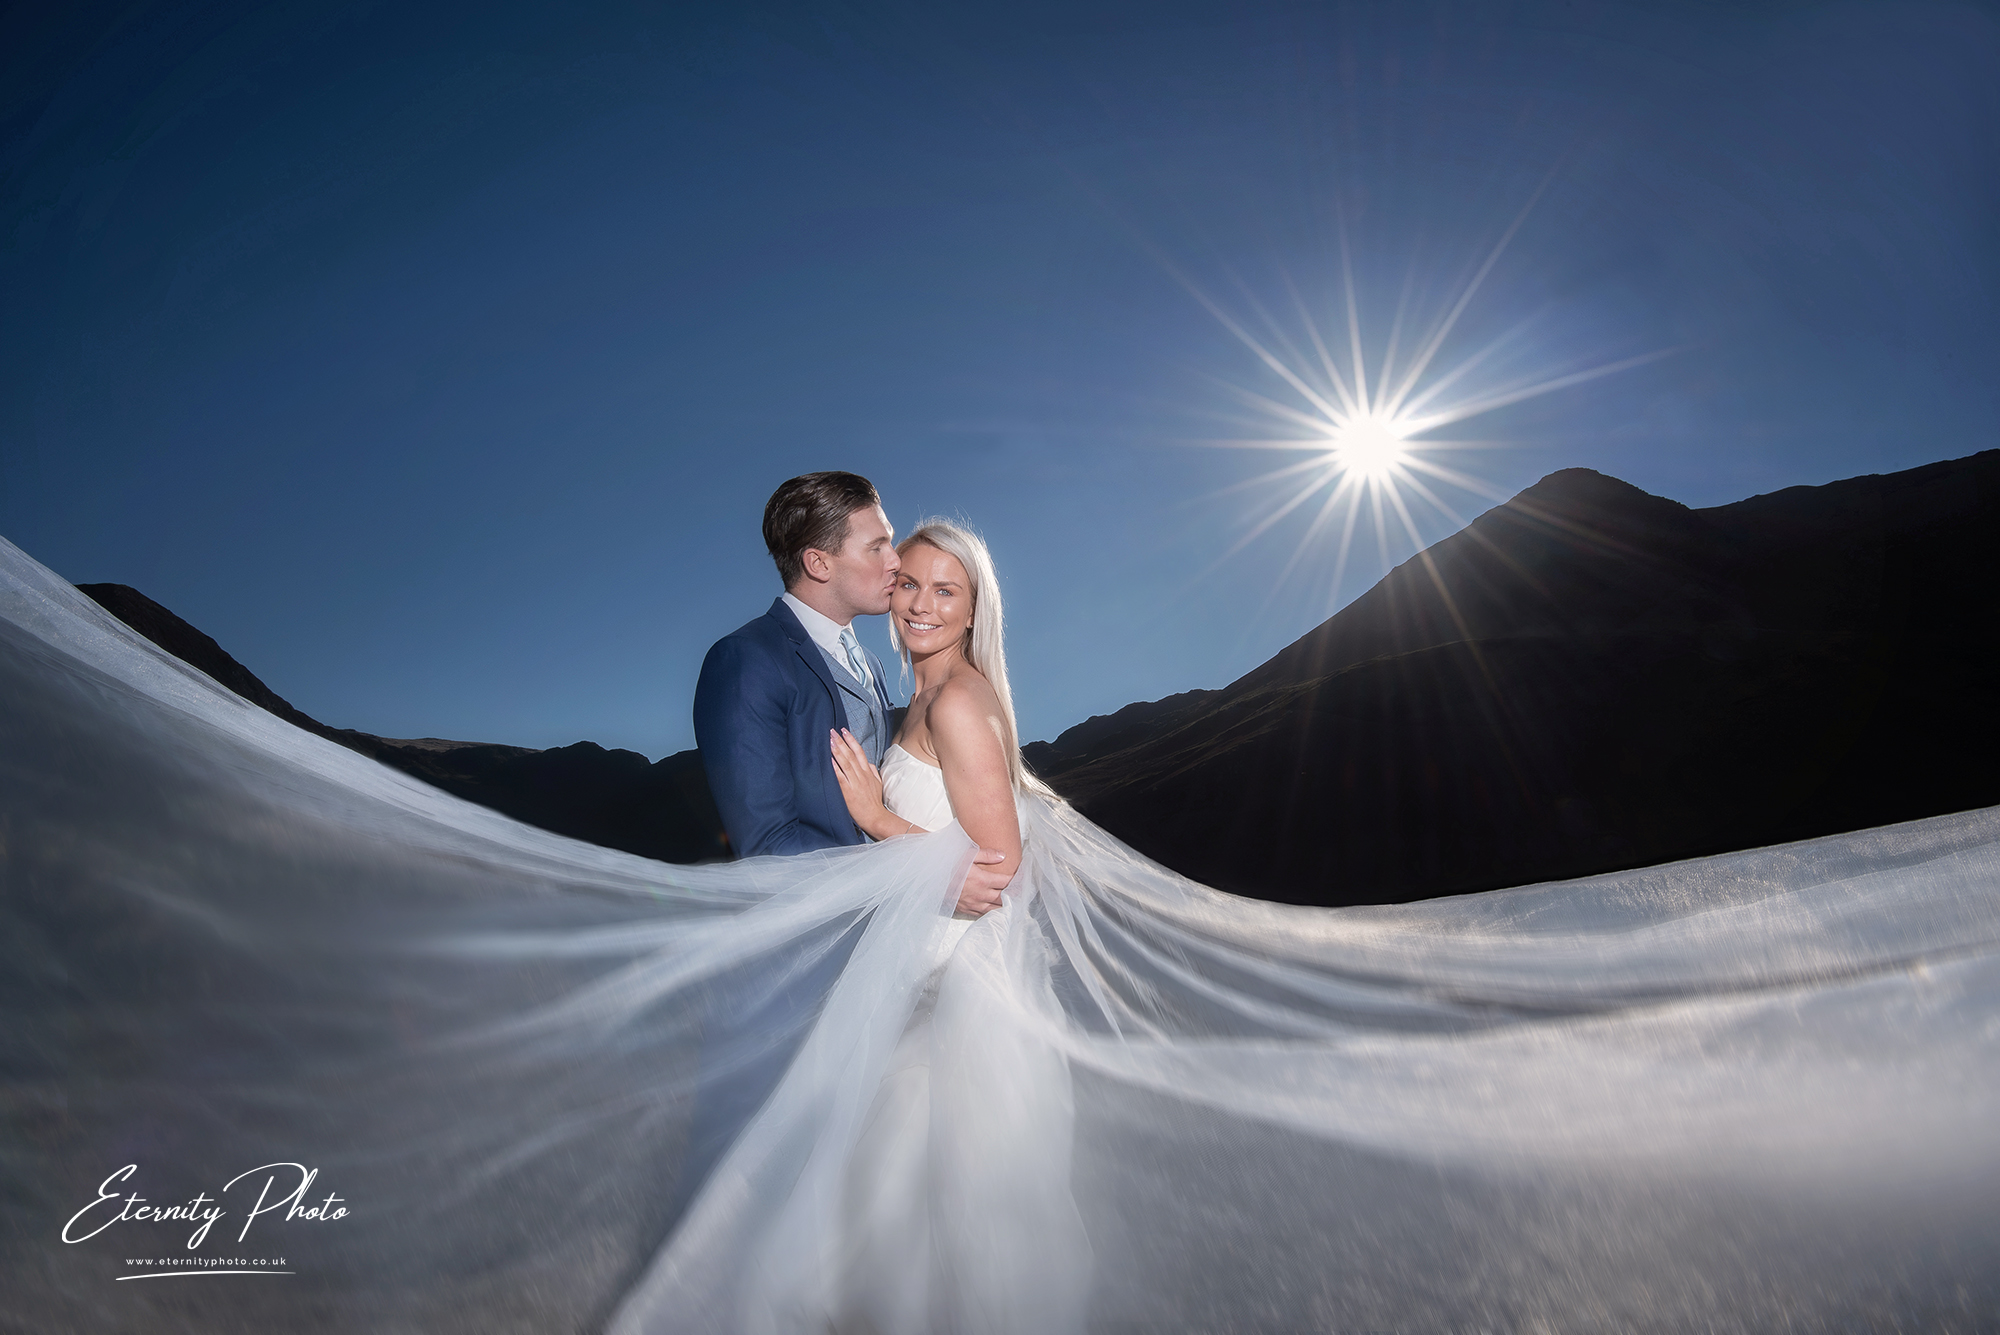 Bride and groom embracing in mountains with flowing veil